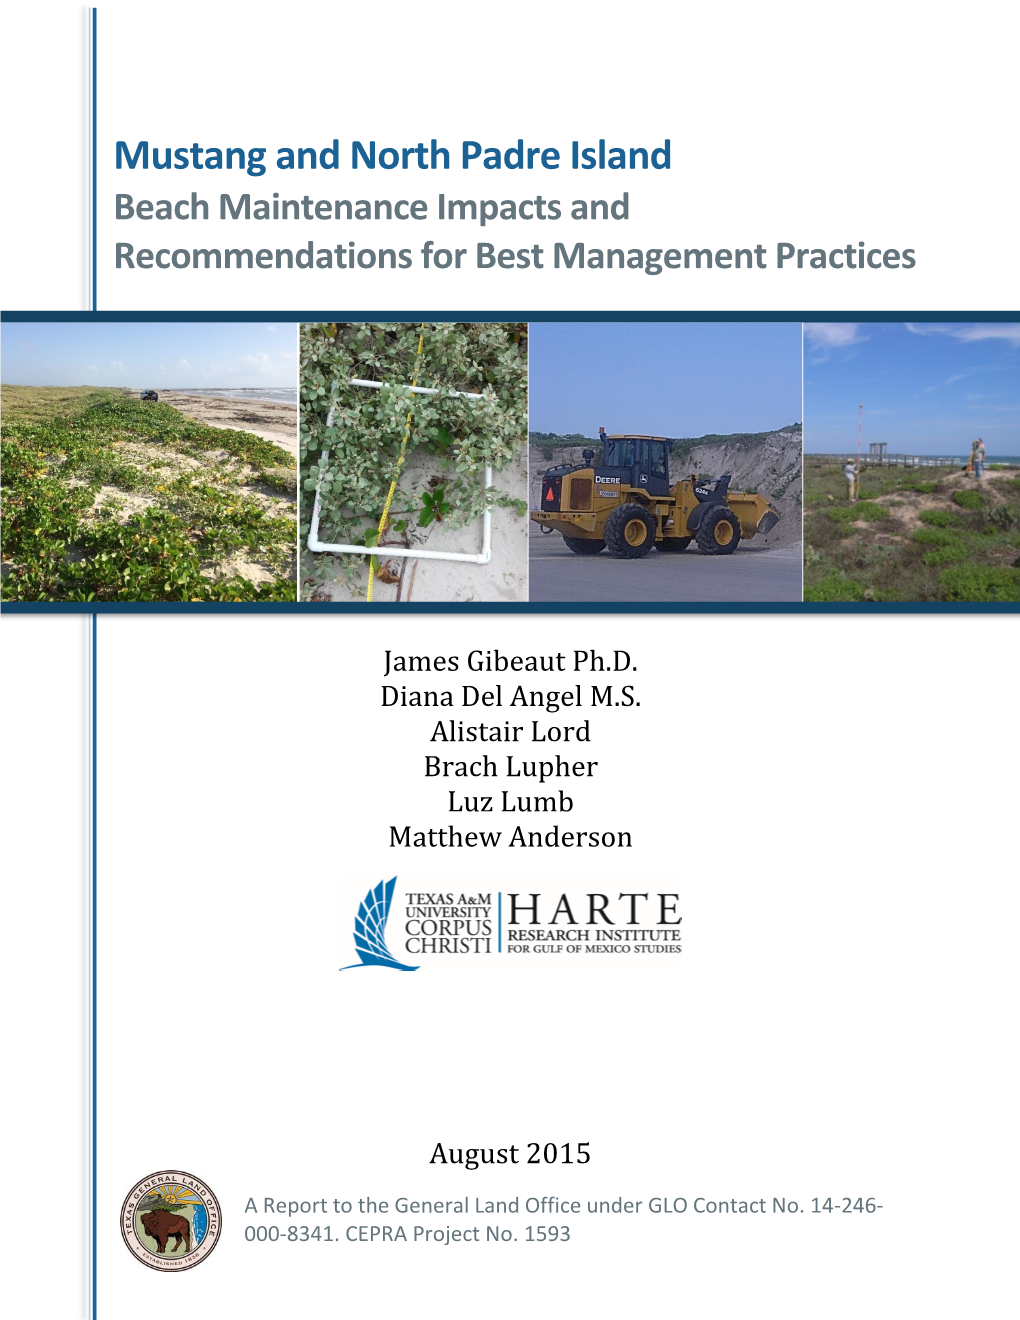 Mustang and North Padre Island Beach Maintenance Impacts and Recommendations for Best Management Practices